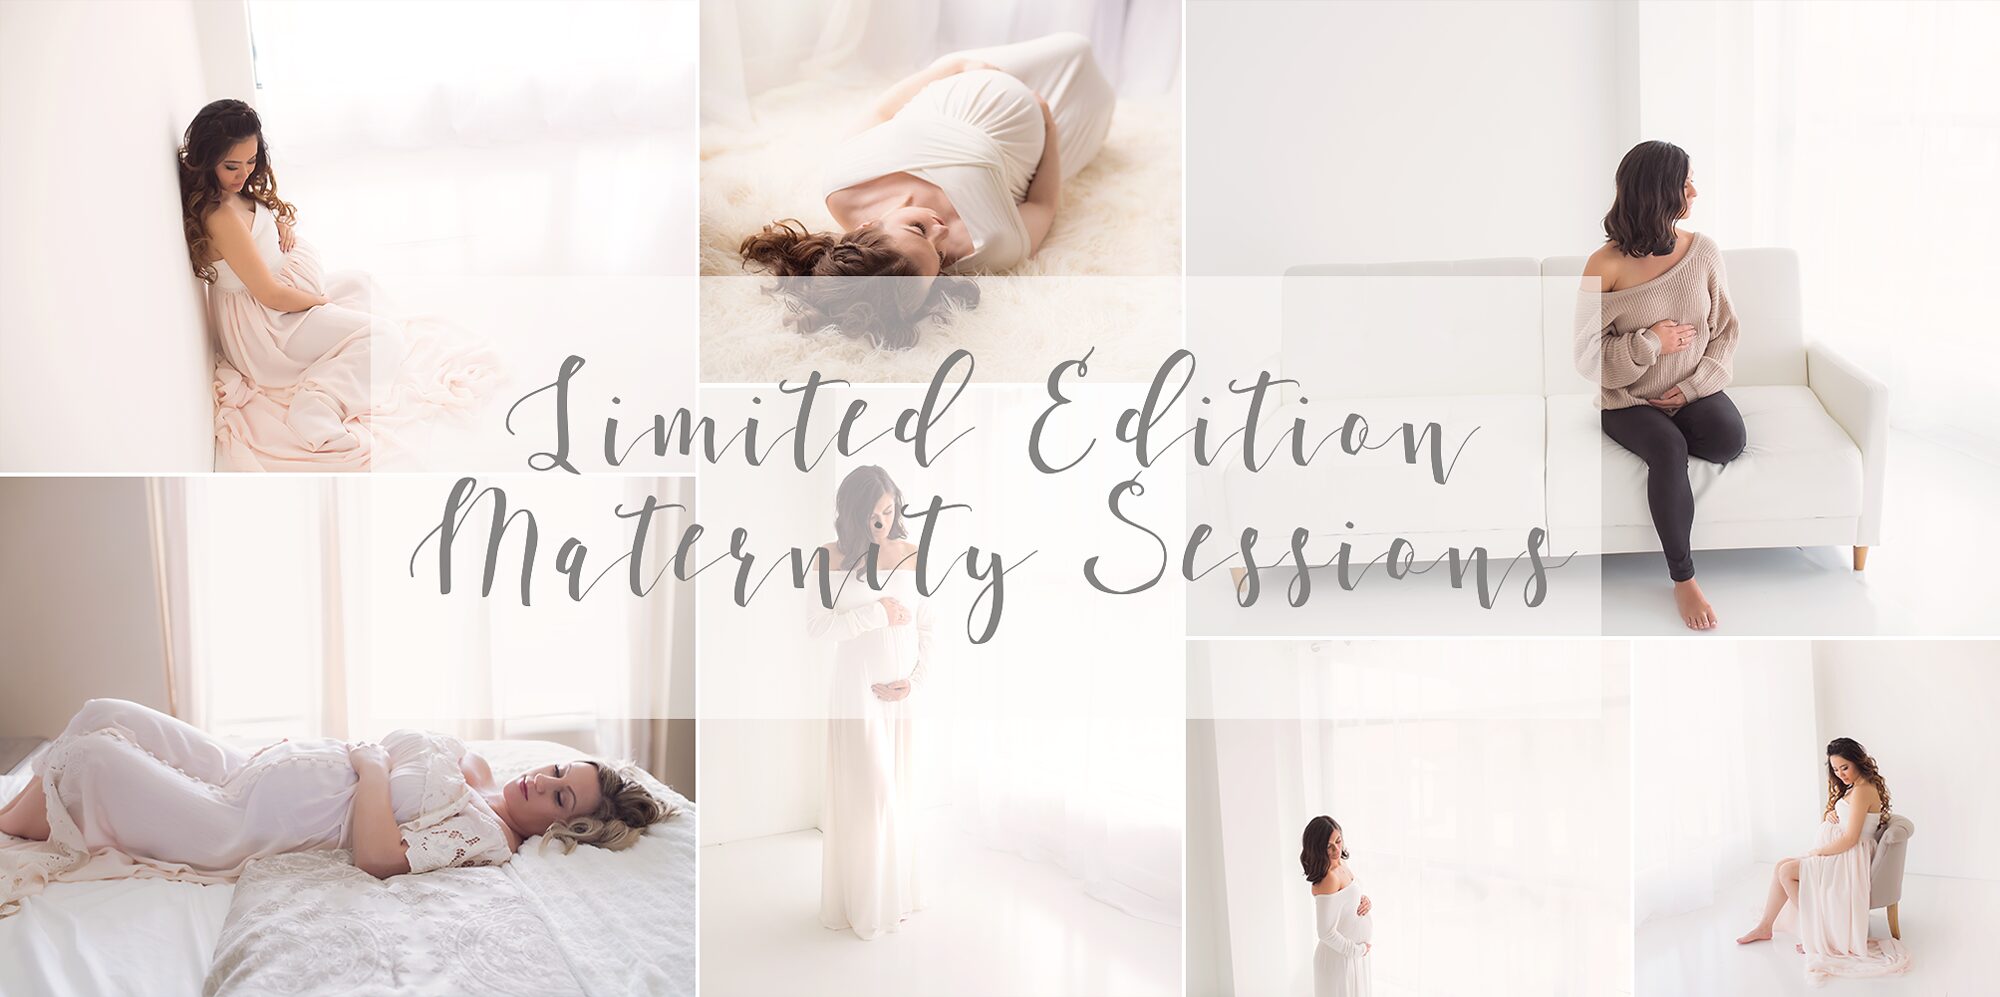 Limited Edition Maternity Session